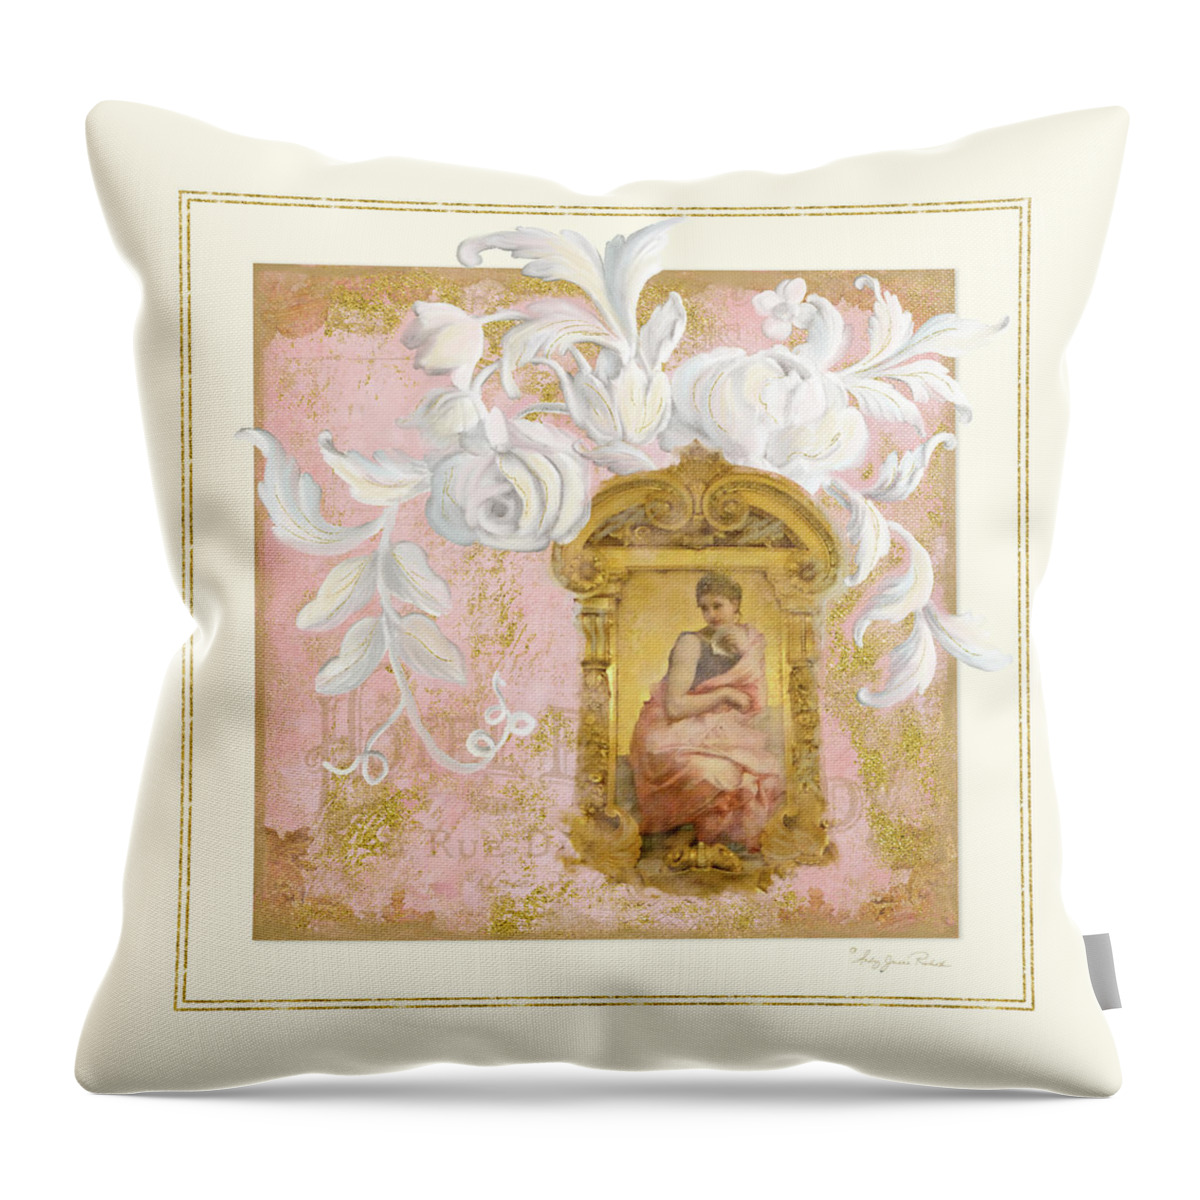 Rococo Throw Pillow featuring the painting Gilded Age II - Baroque Rococo Palace Ceiling Inspired by Audrey Jeanne Roberts